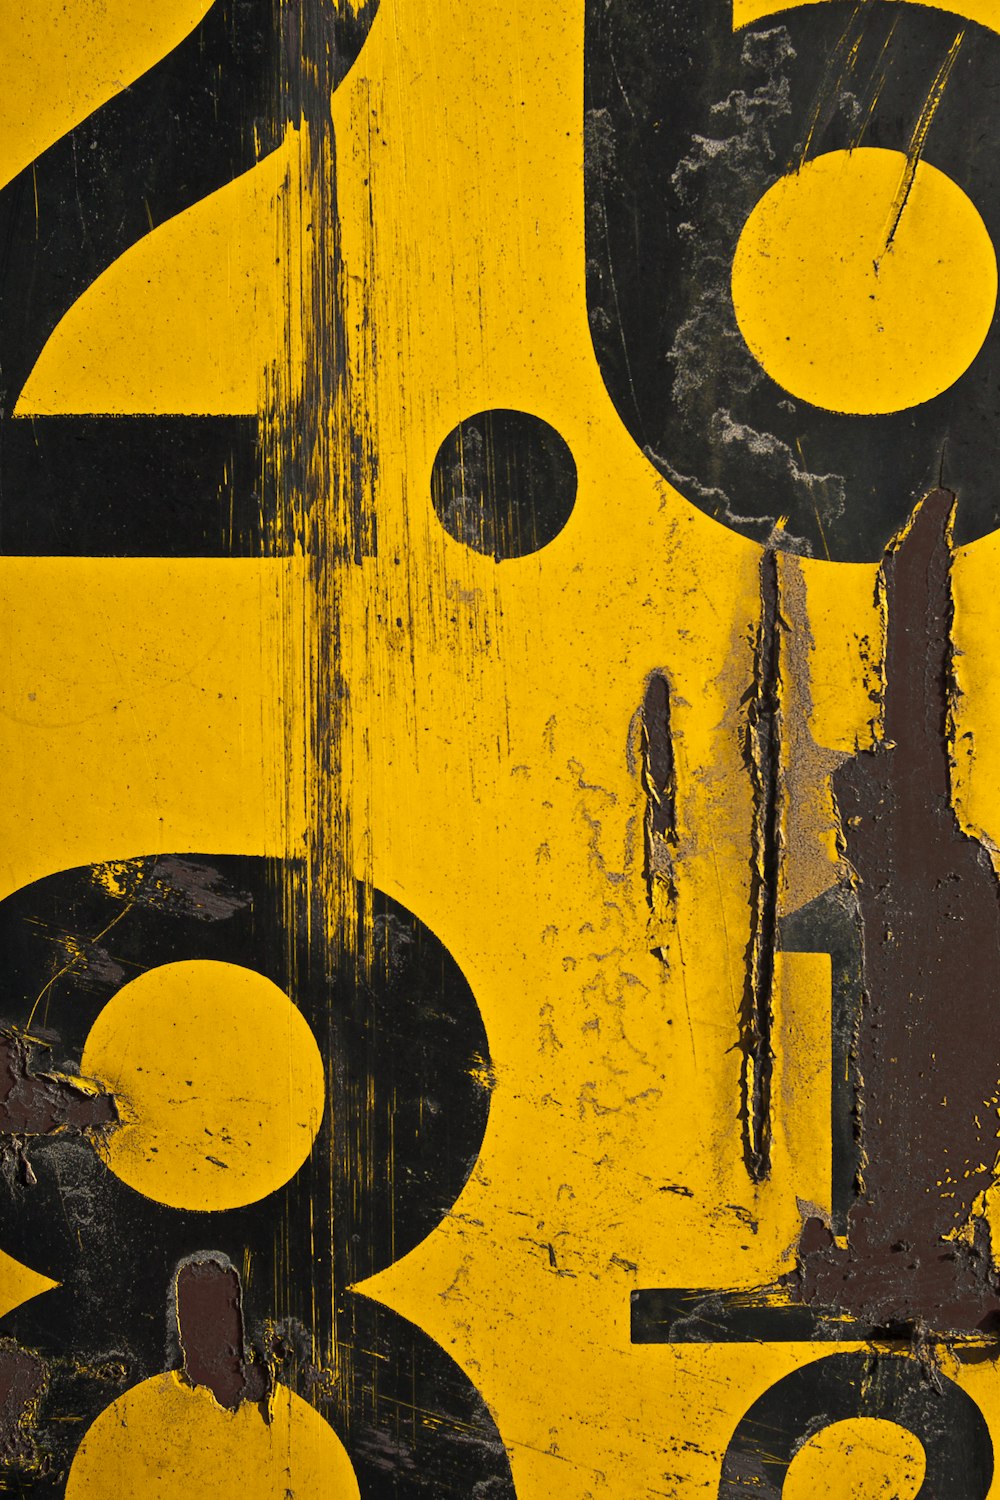 a close up of a yellow and black sign with numbers